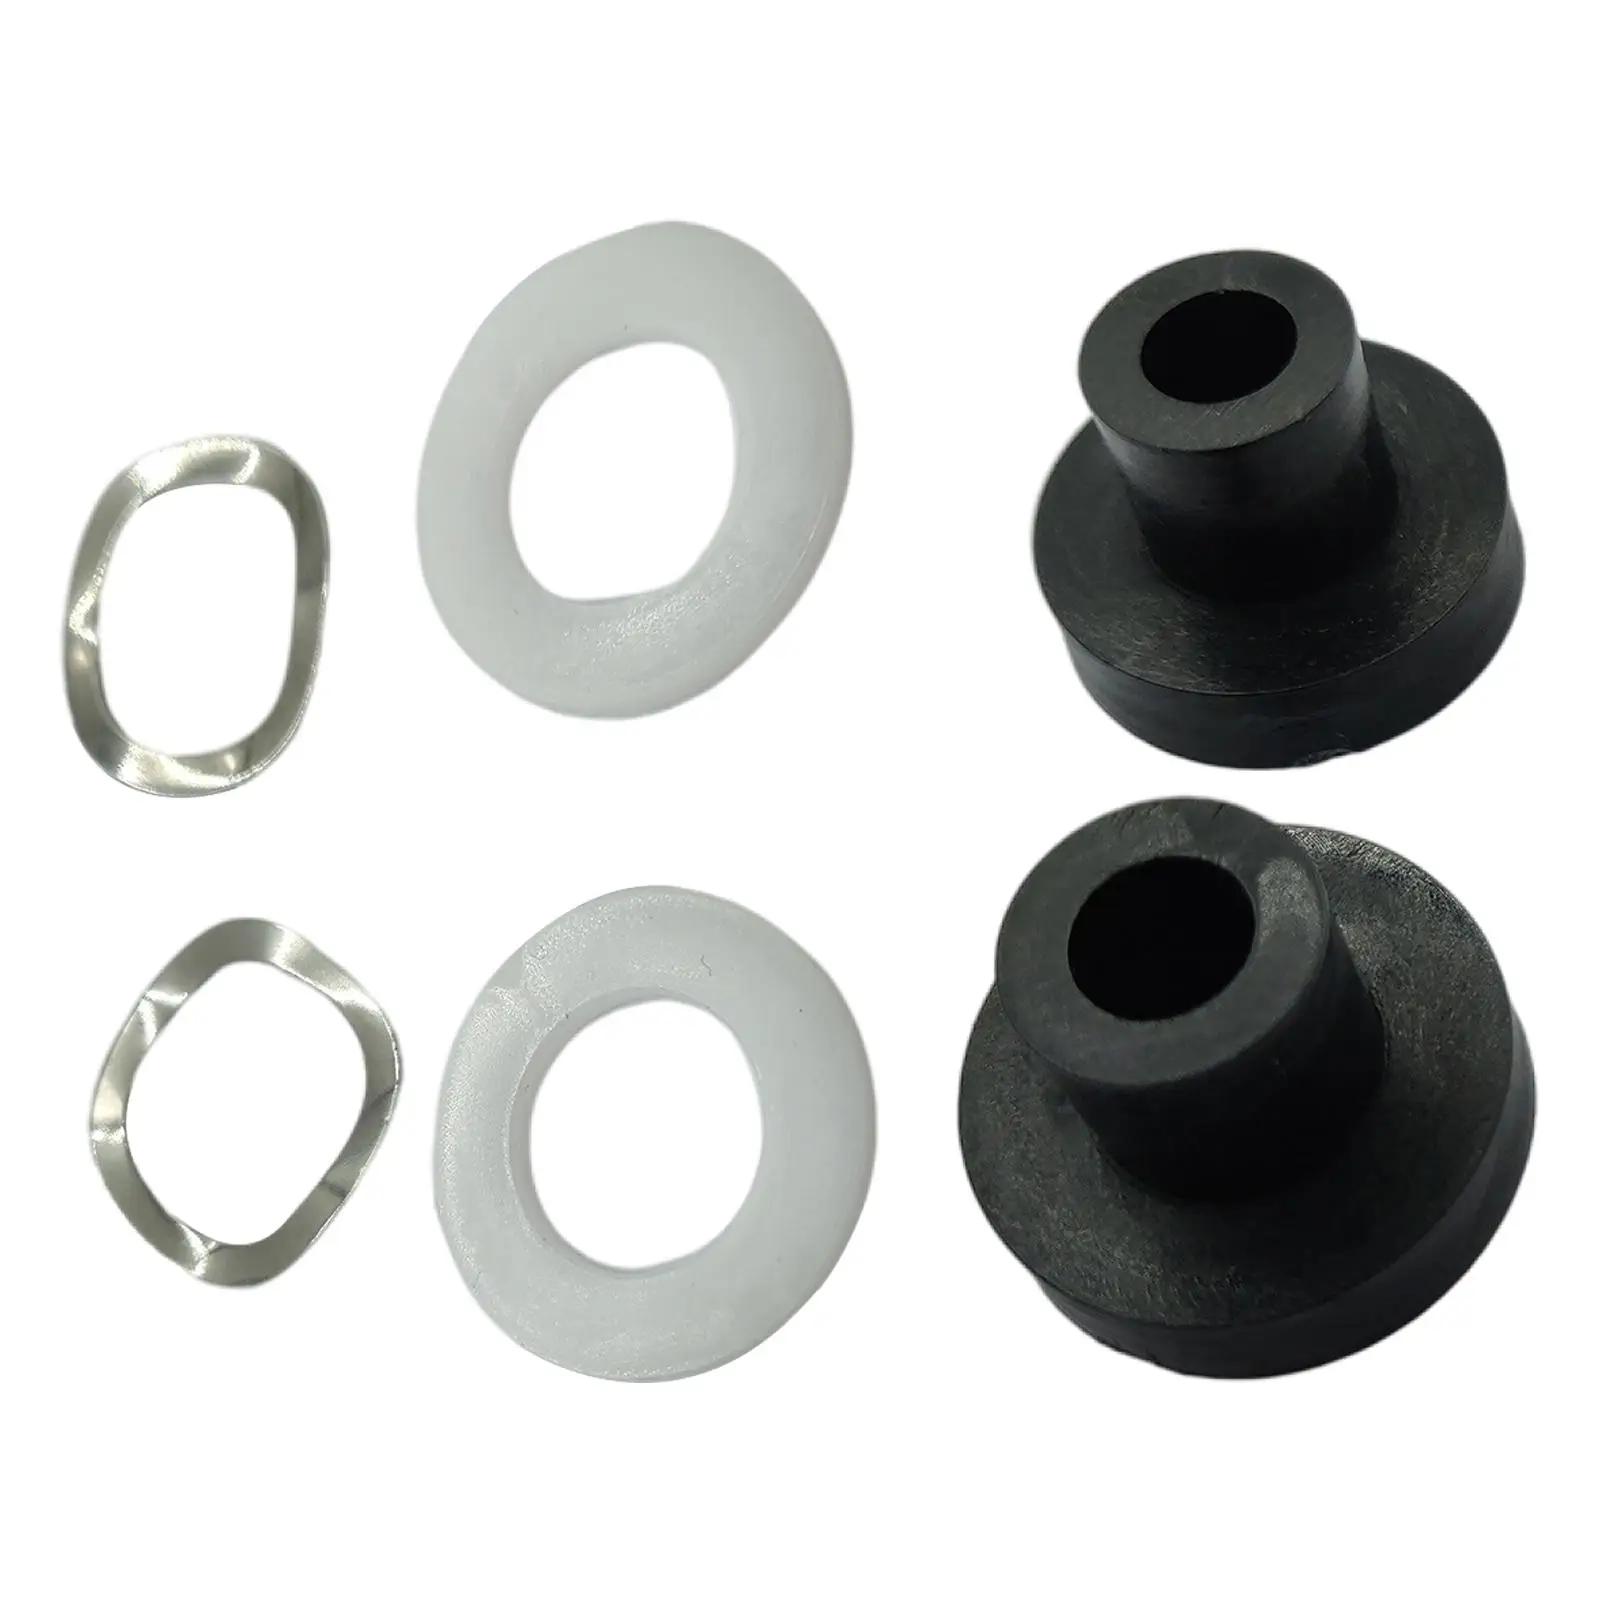 2x Car Window Bushings 909 Replacement Spare Parts Premium Professional Accessories High Performance Fit for 990